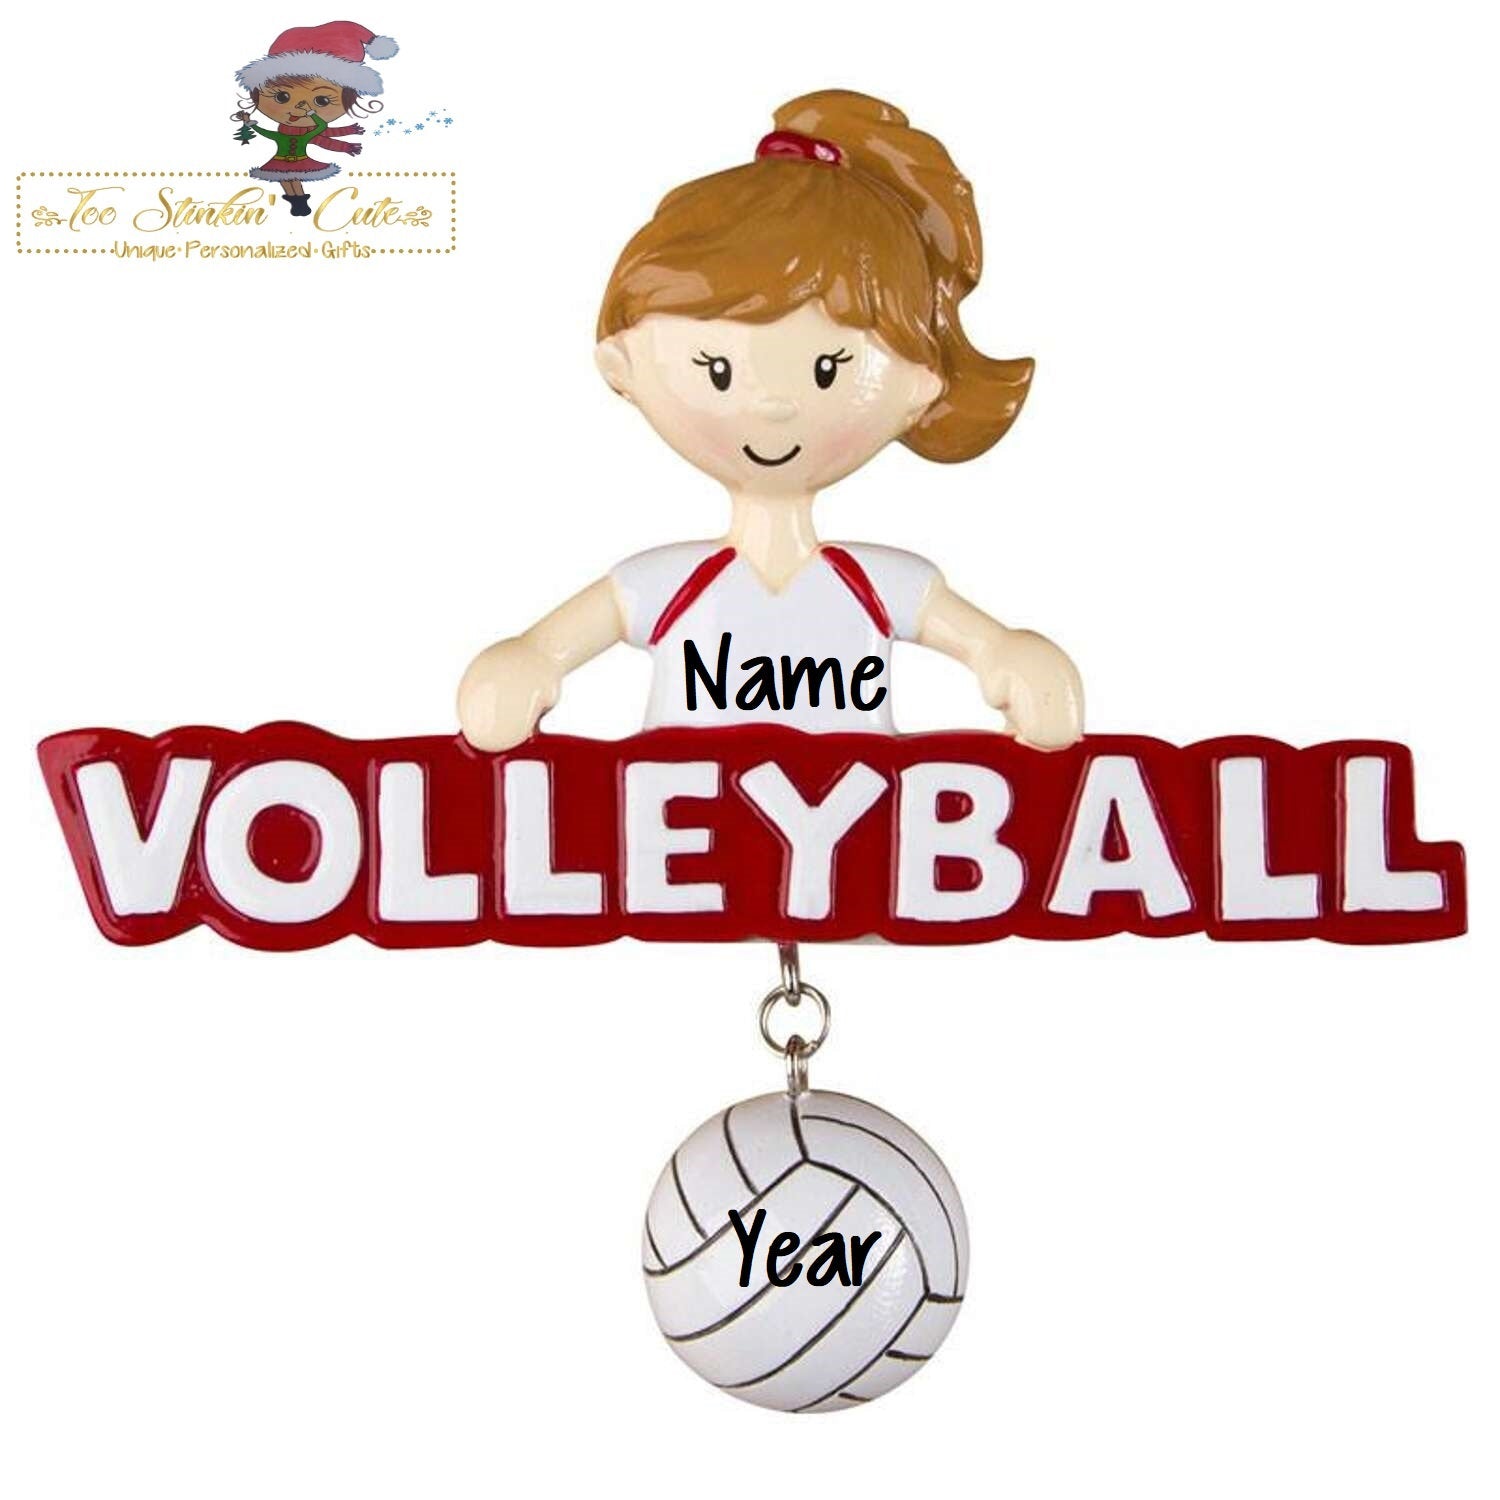 Christmas Ornament Volleyball/ Girls/ Sports - Personalized + Free Shipping!